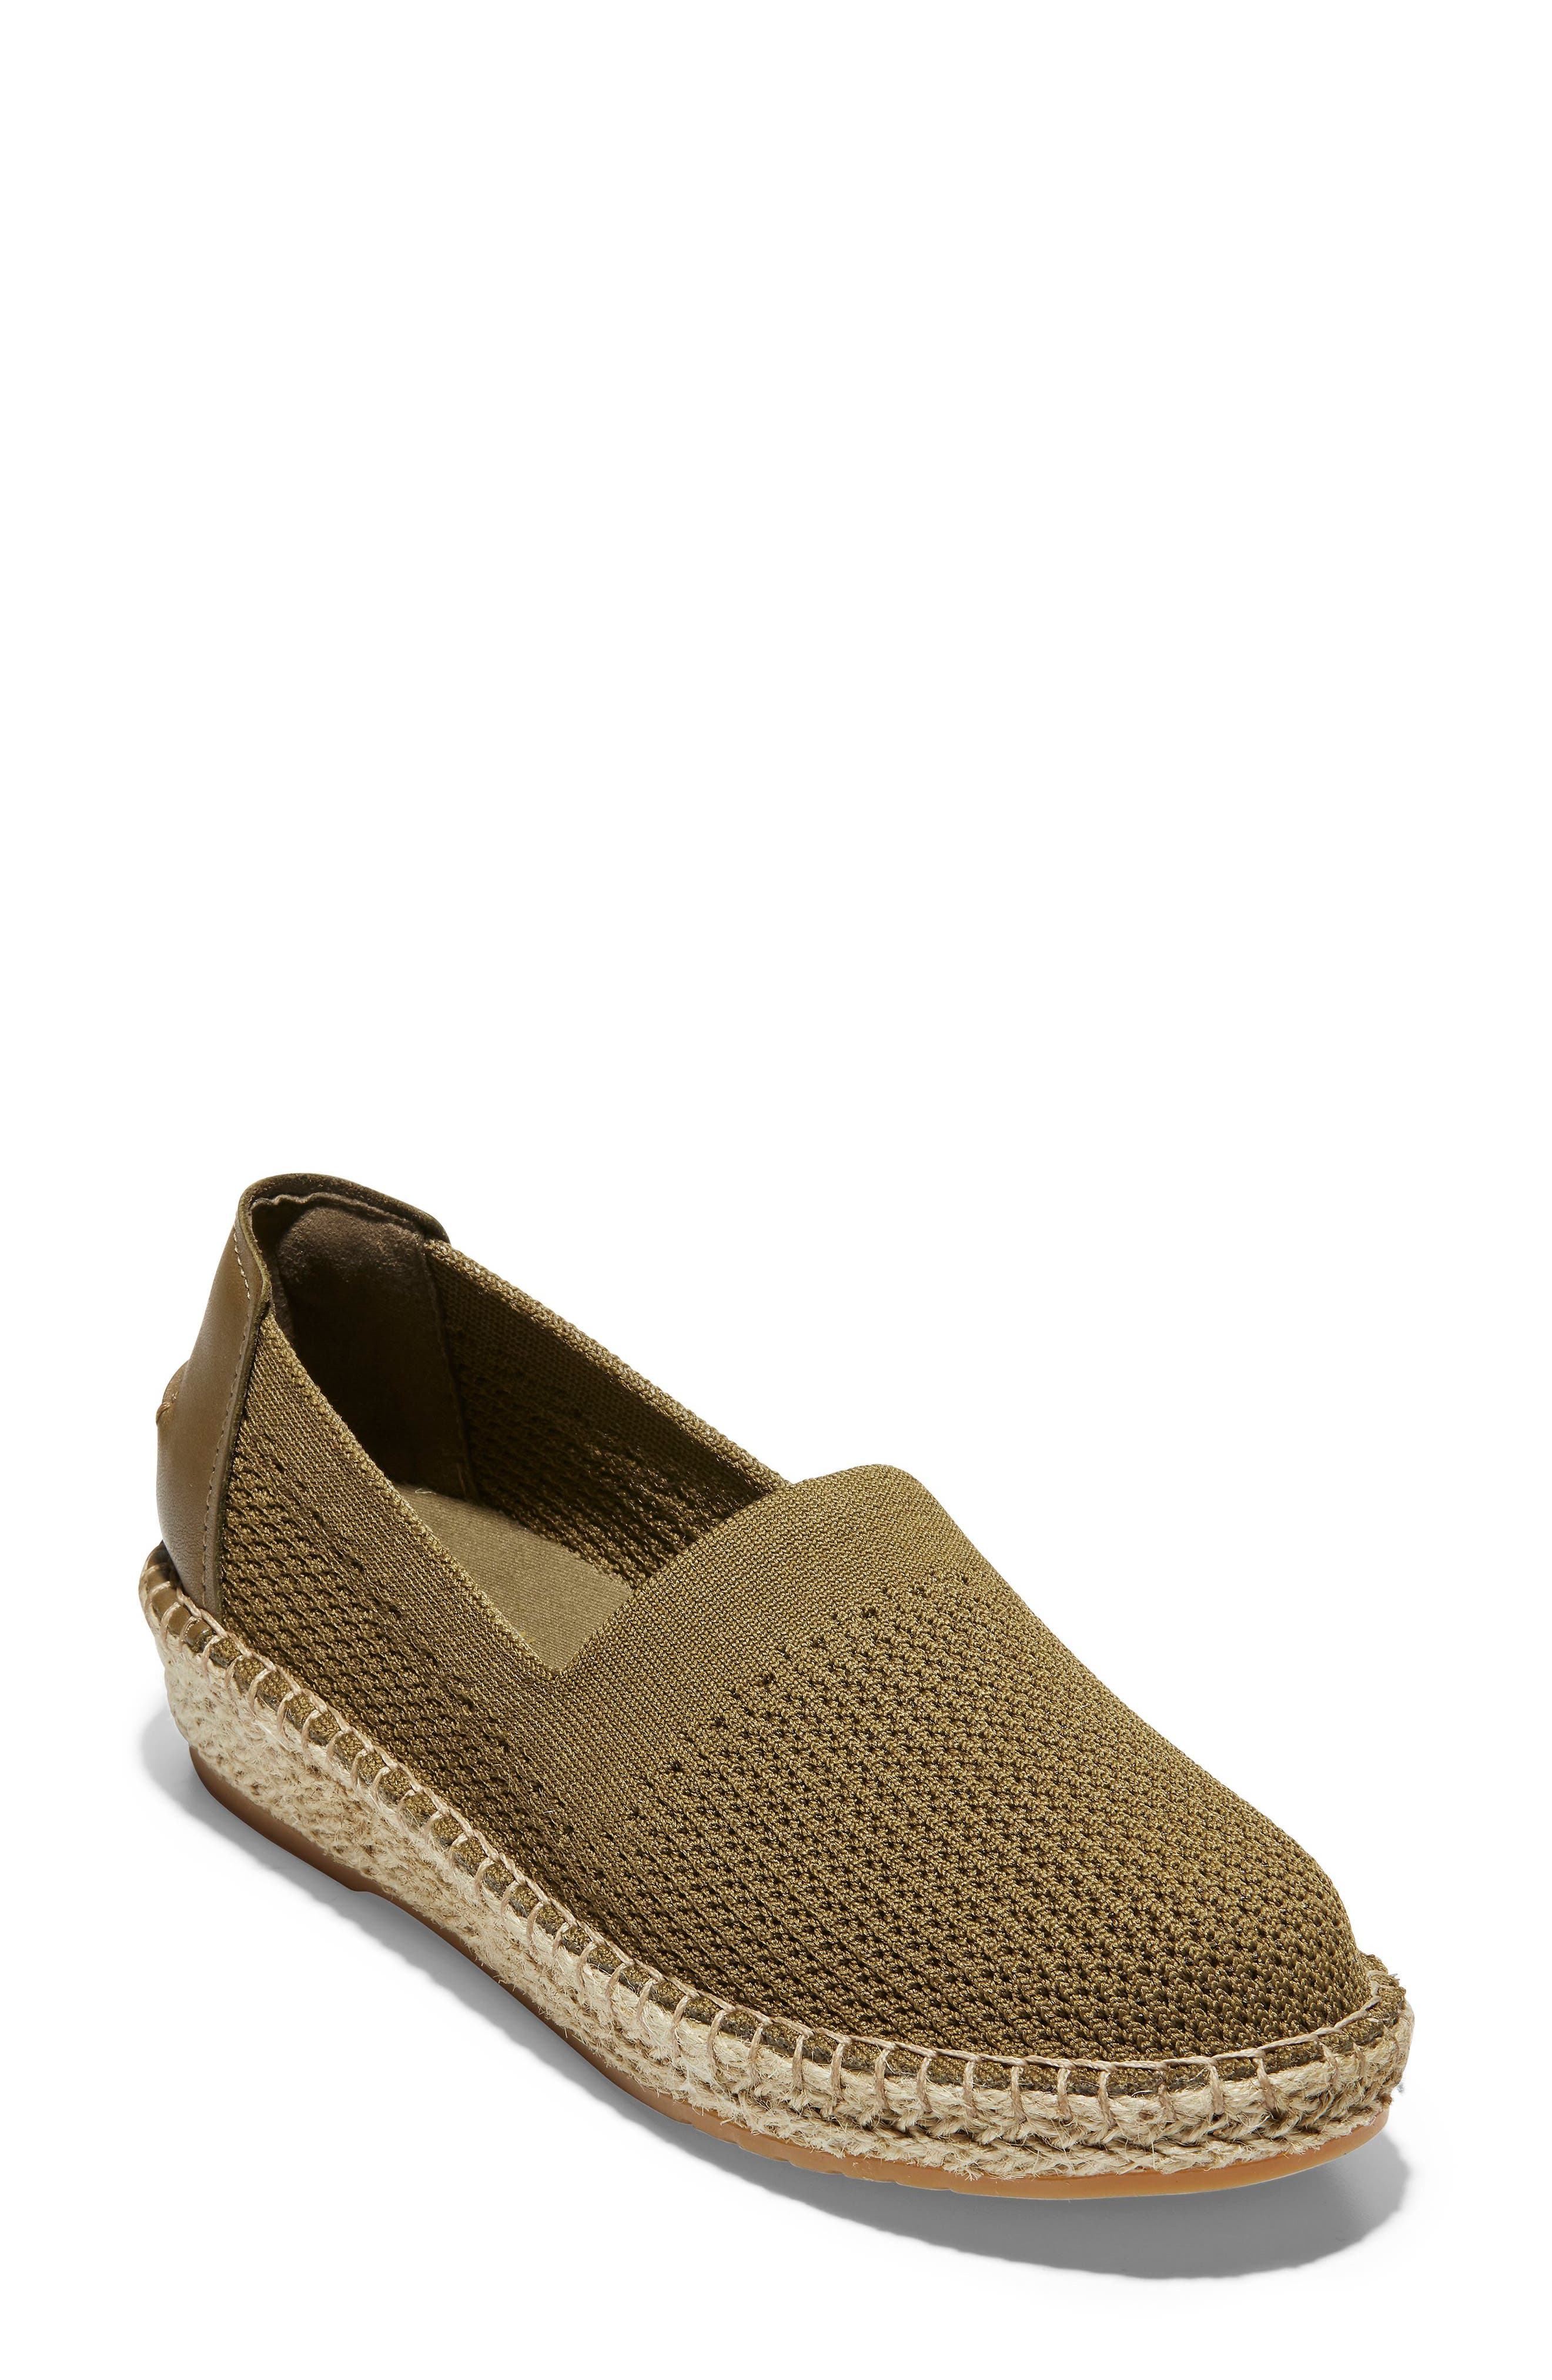 cloudfeel espadrille with stitchlite